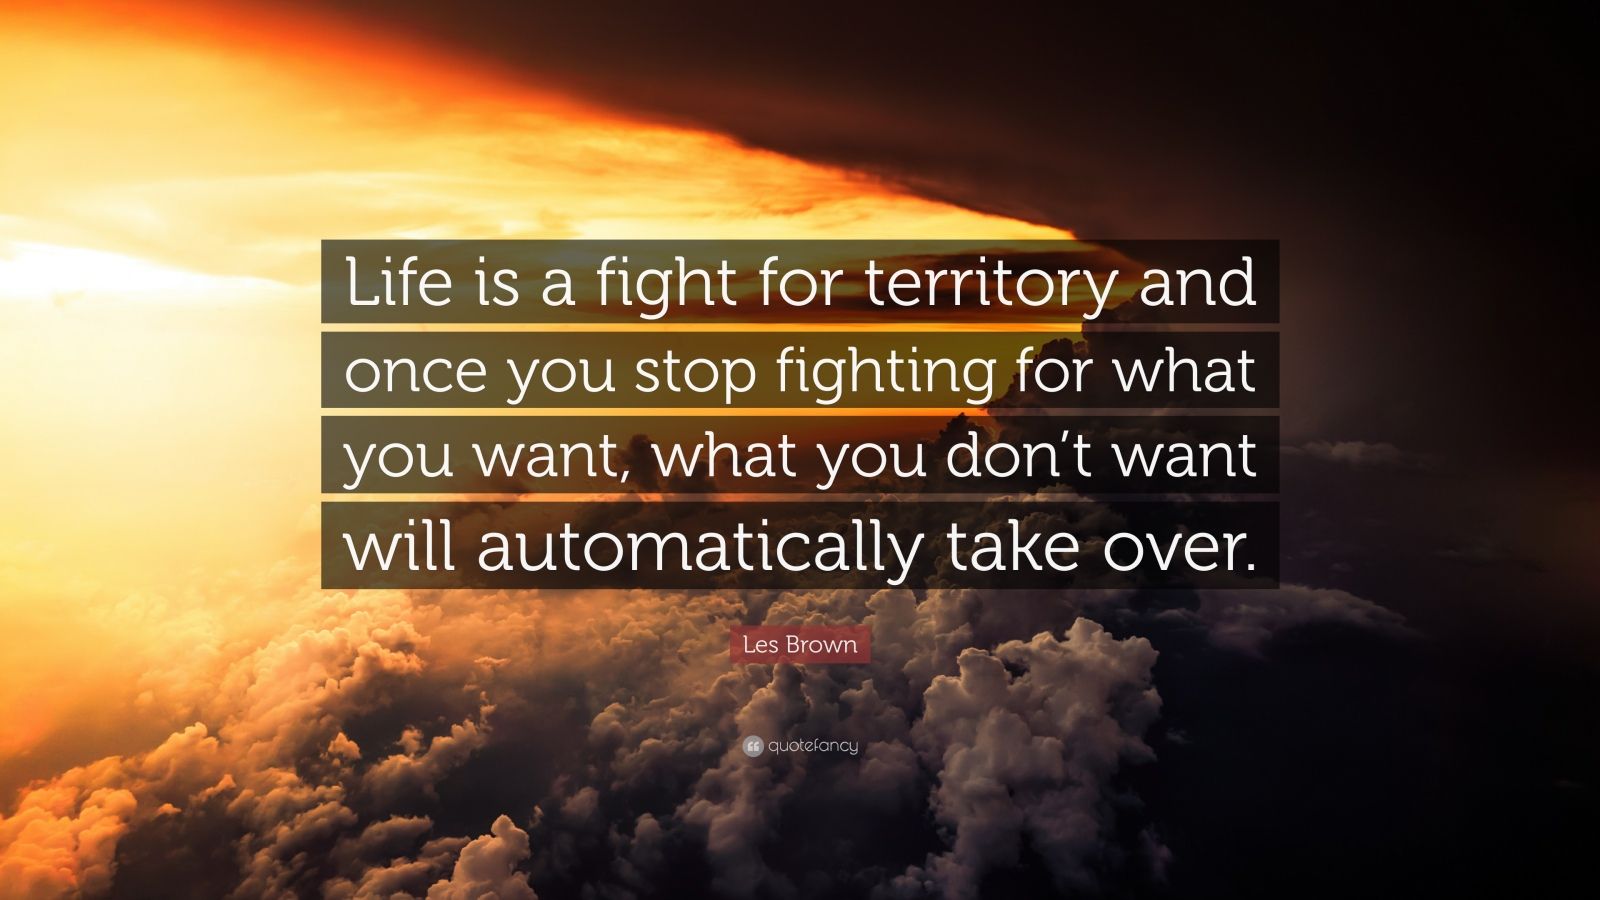 Les Brown Quote: "Life is a fight for territory and once you stop fighting for what you want ...